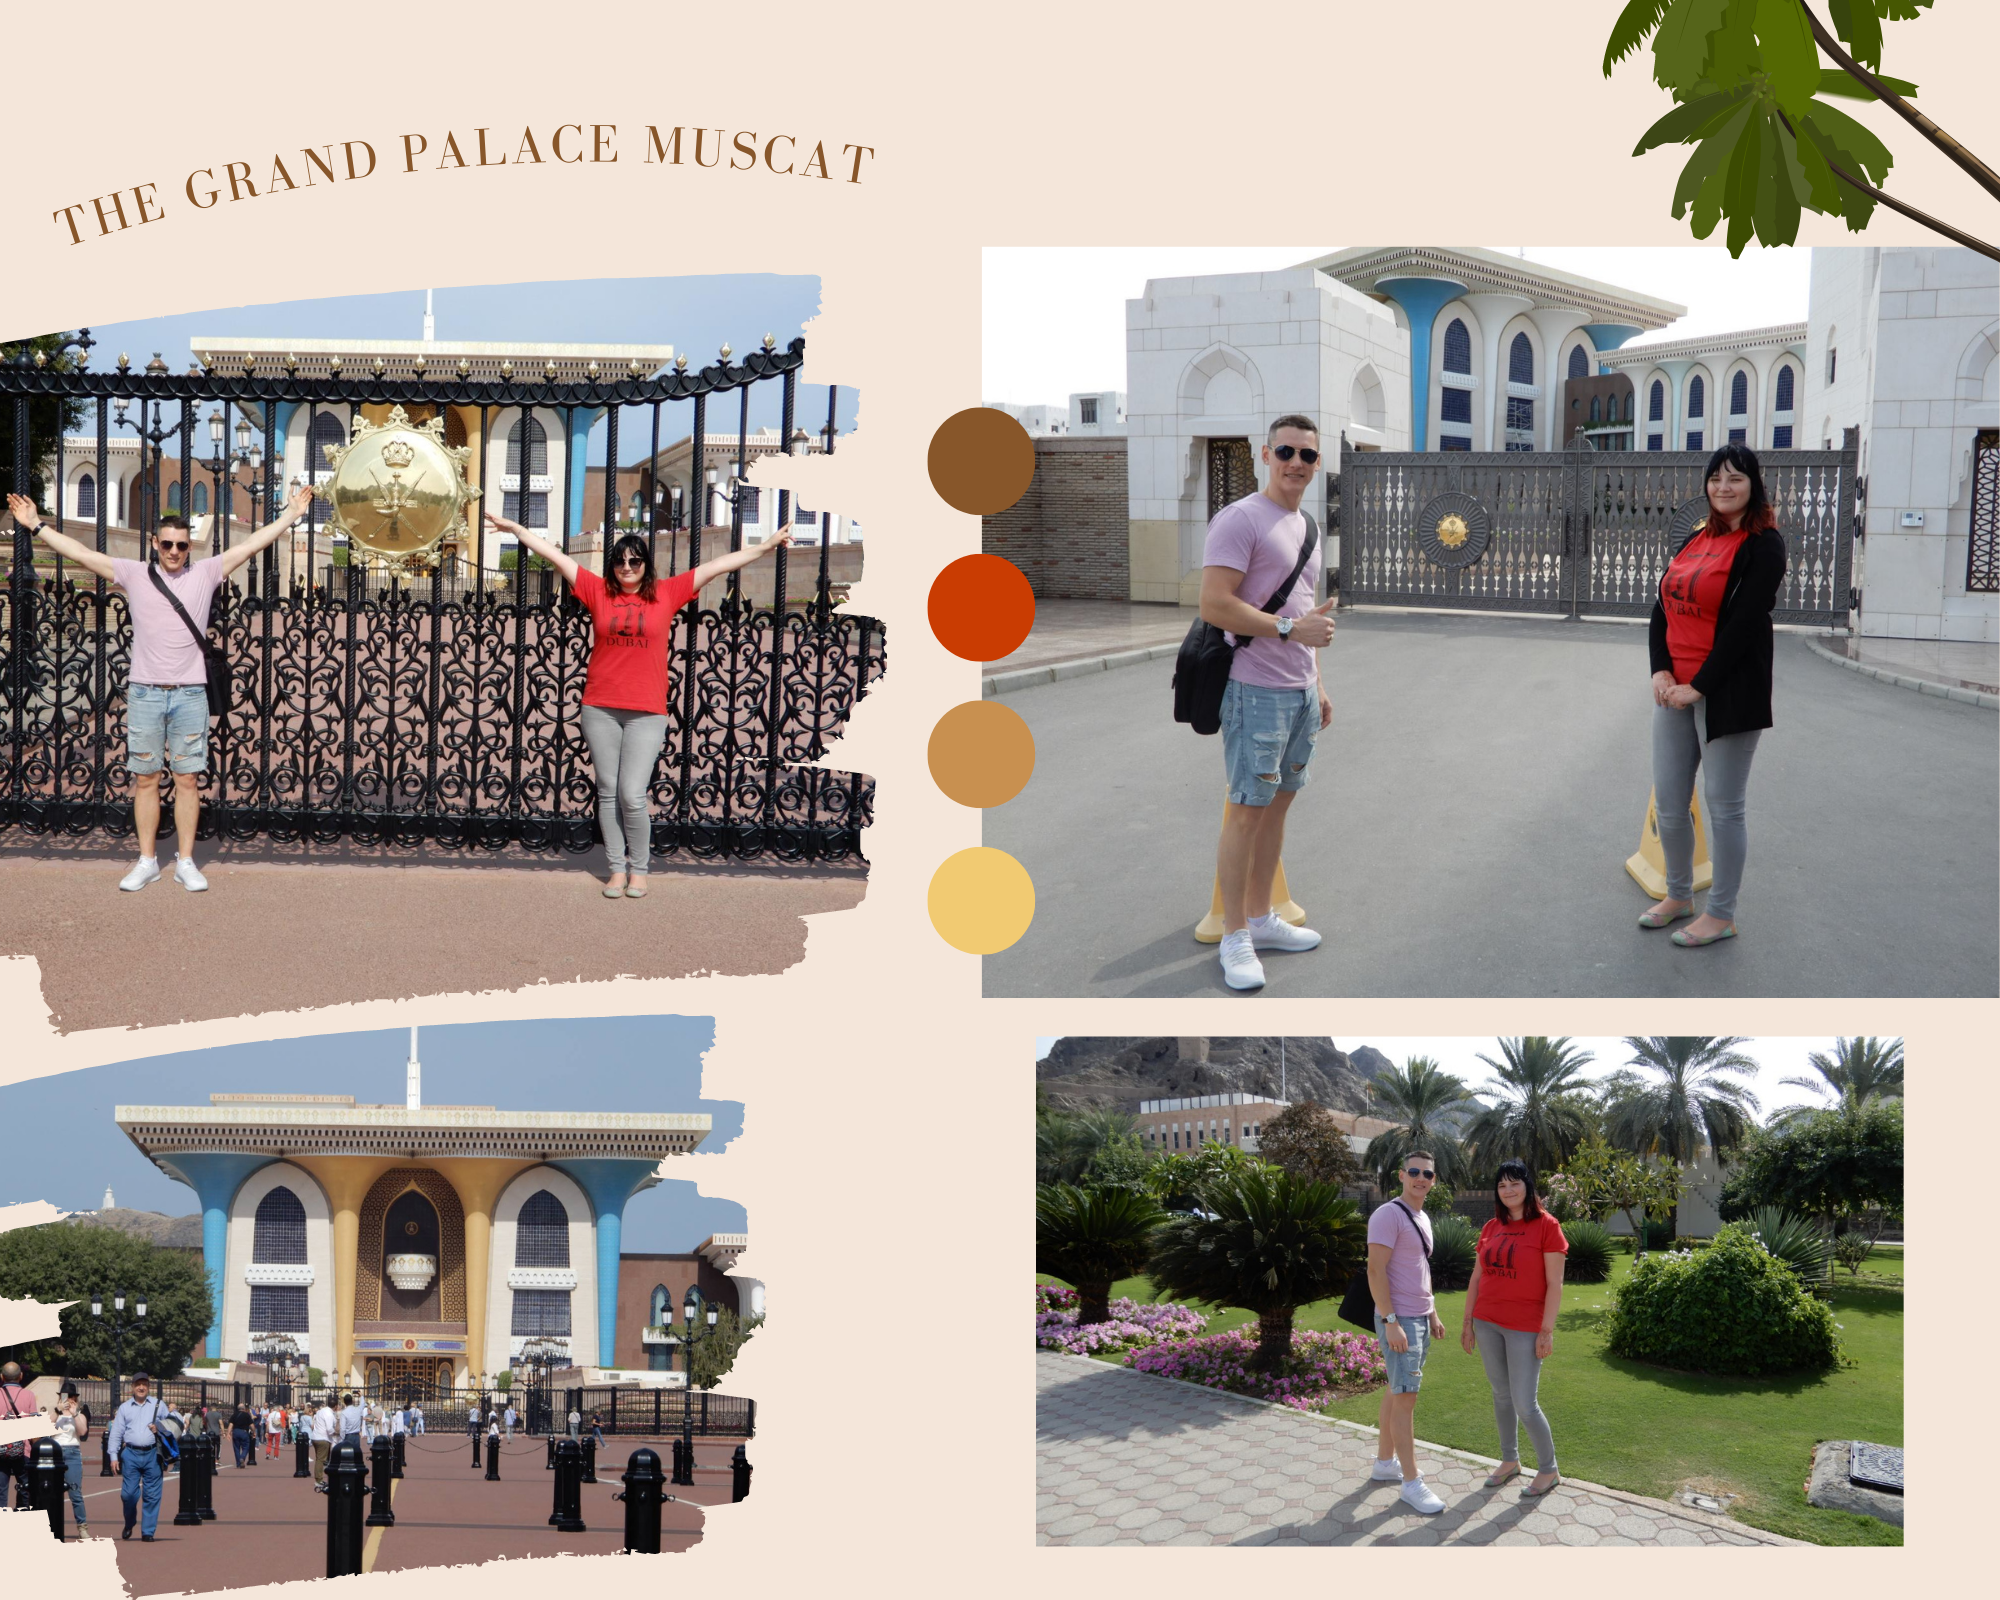 The Grand Palace Muscat